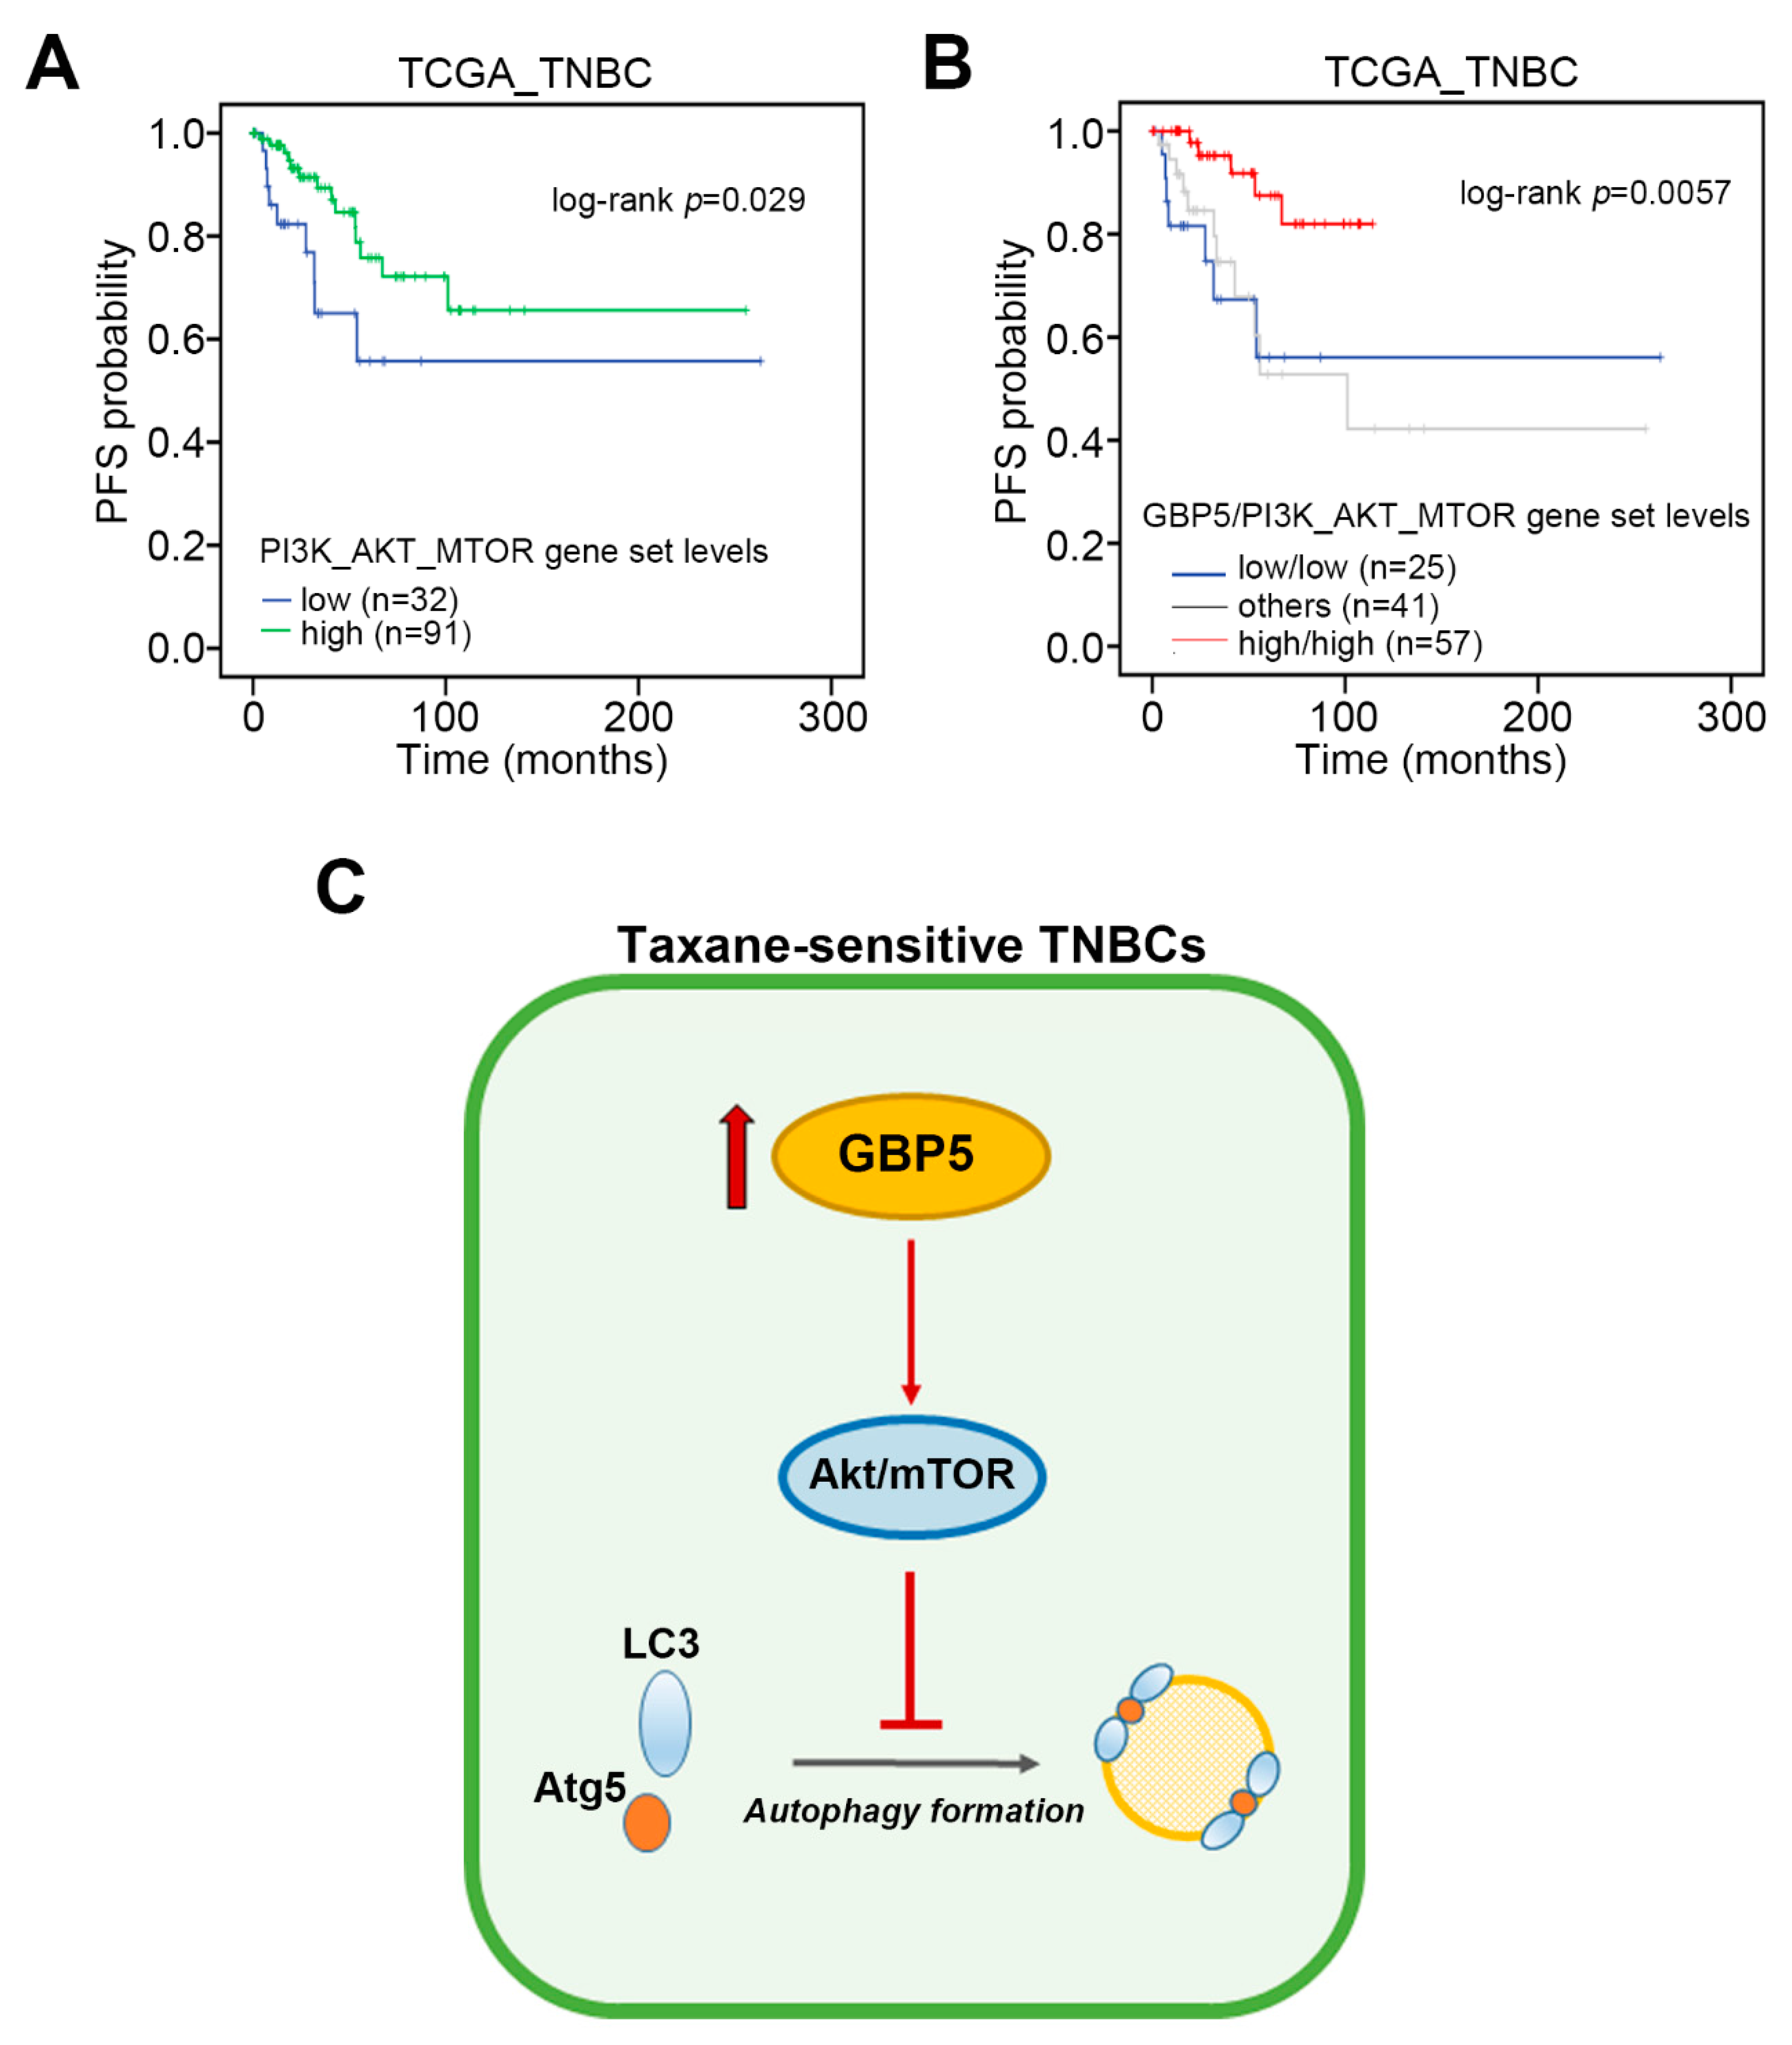 Jpm Free Full Text Gbp5 Serves As A Potential Marker To Predict A Favorable Response In Triple Negative Breast Cancer Patients Receiving A Taxane Based Chemotherapy Html